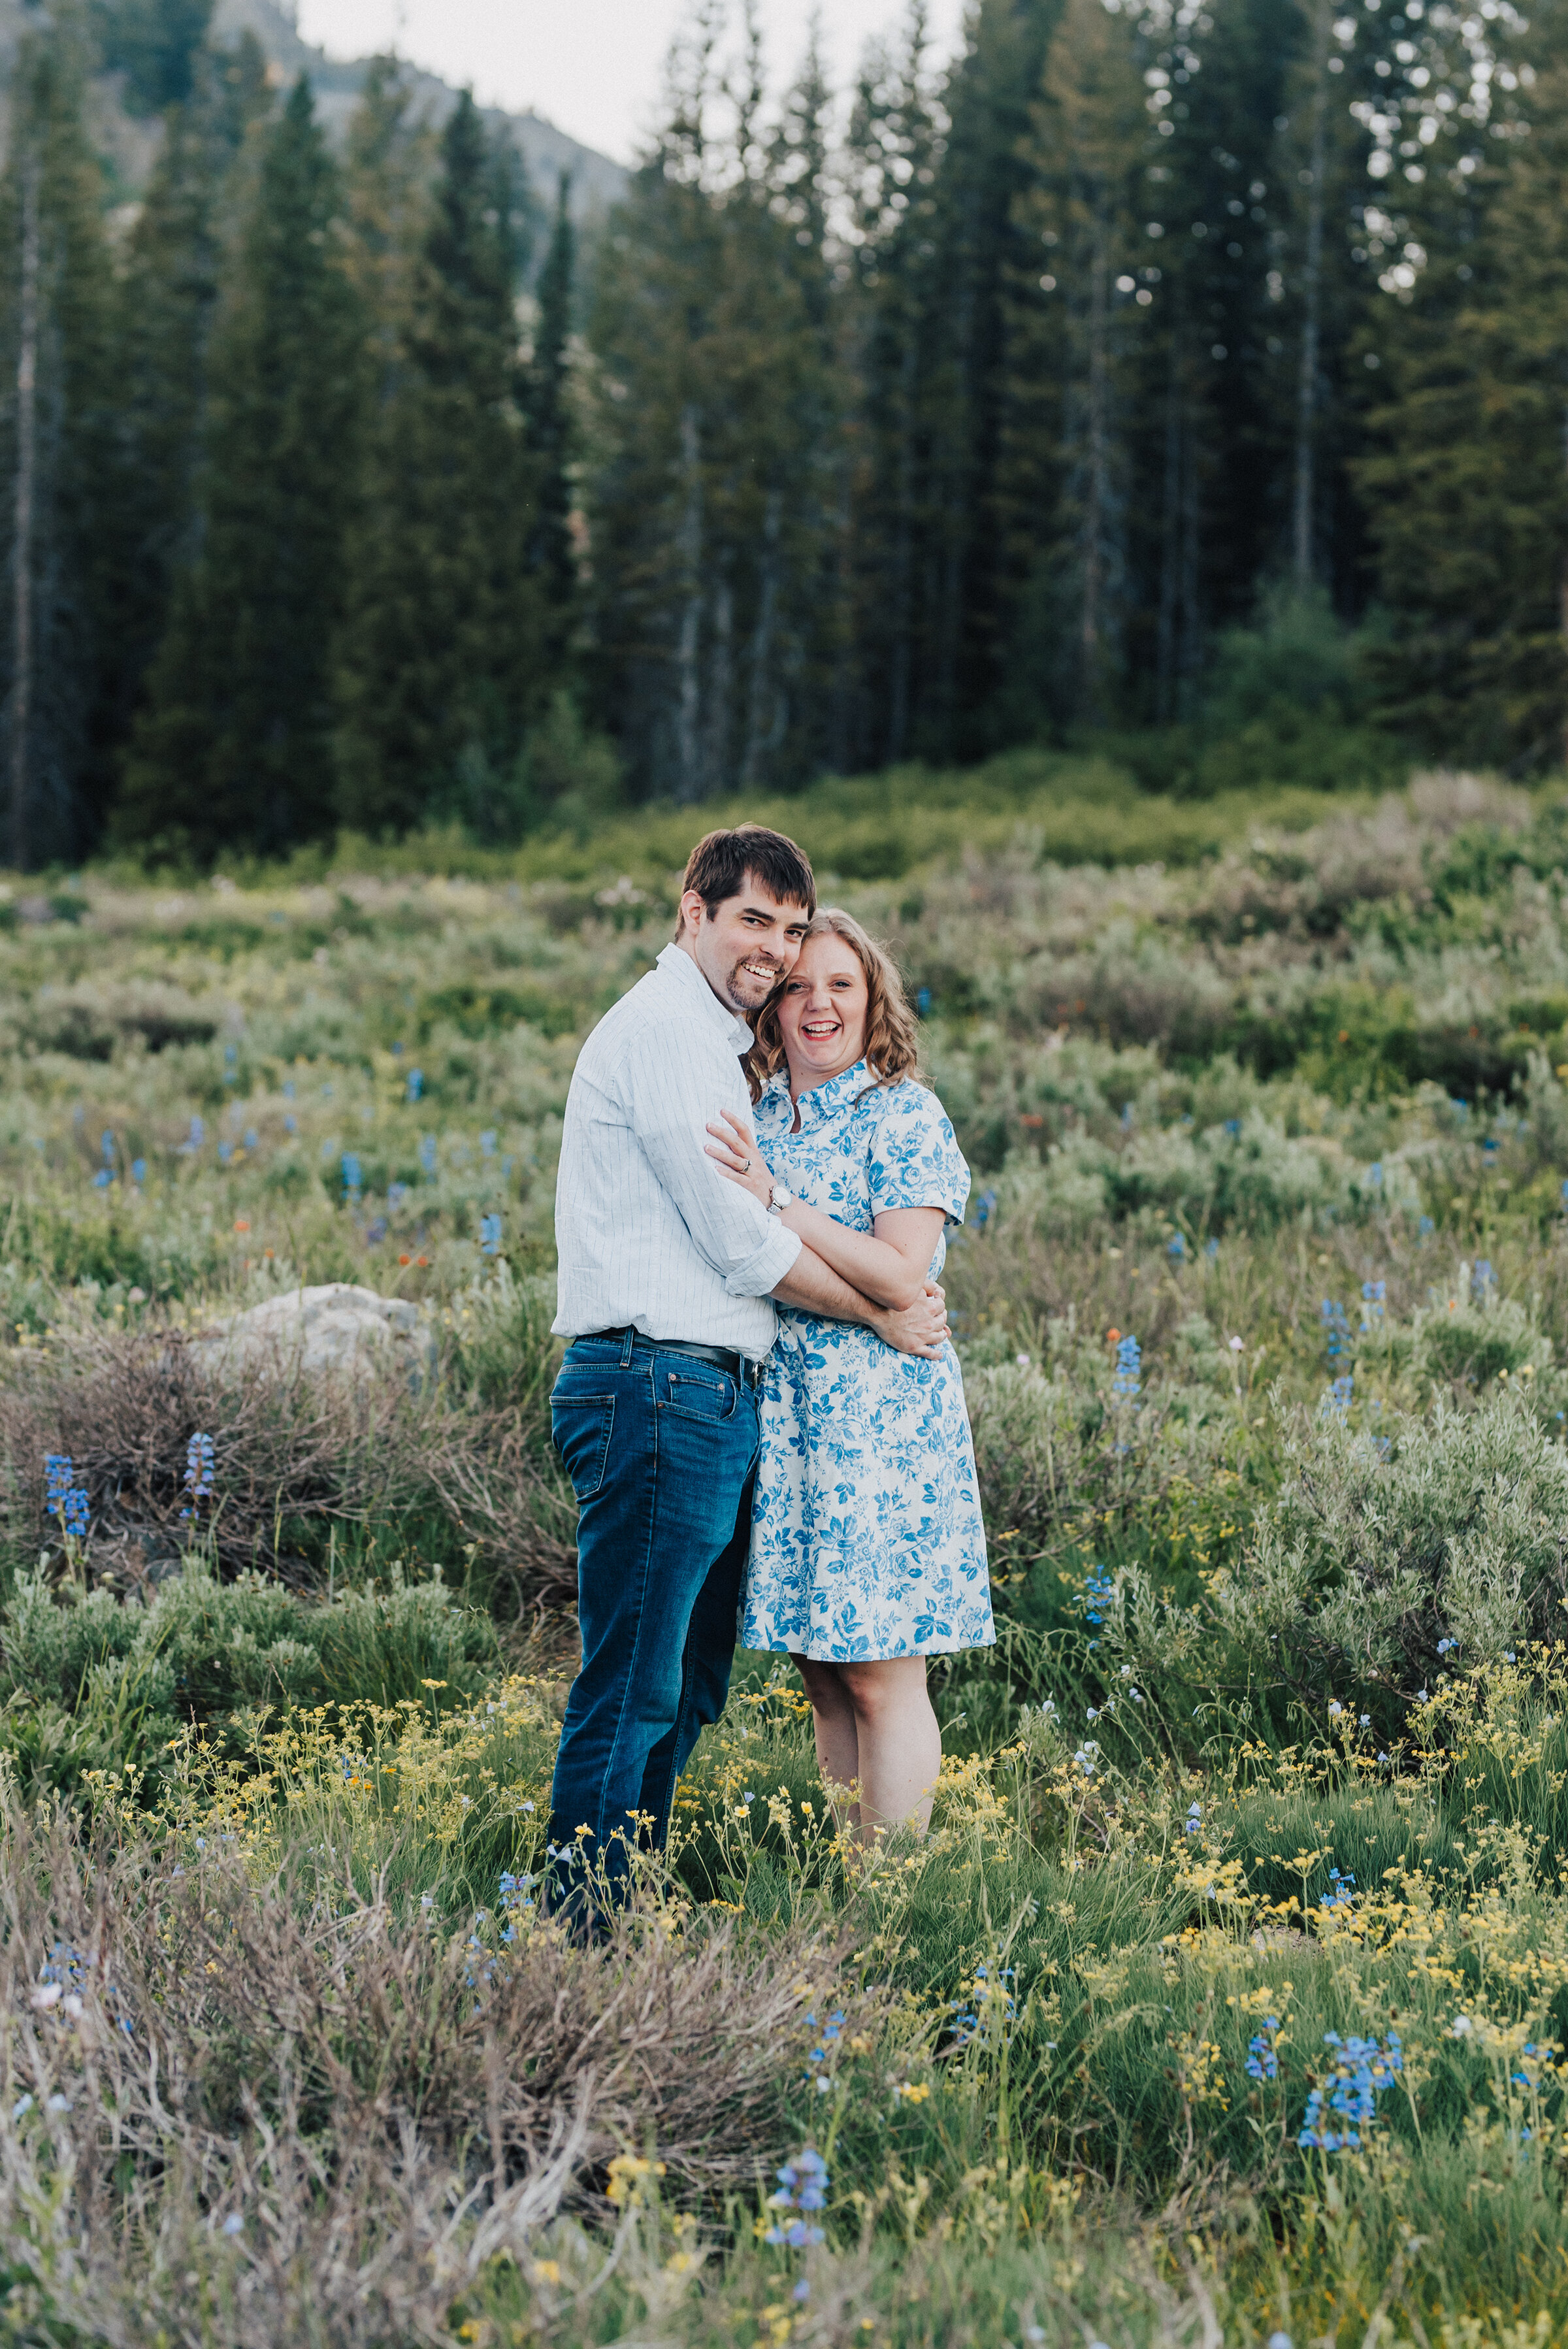  Lovely couple at this gorgeous meadow up Logan canyon for this dreamy family photo session. Logan Utah family photographer Kristi Alyse photography Tony Grove forest nature photos Logan canyon light blue family photos wild flowers grand parents children parents spouses reunited dreamy scenic photo shoot #kristialysephotography #utahphotographer #familyphotography #logancanyon #familyphotos #forest #wildflowers #northernutah #familyportraits #family 